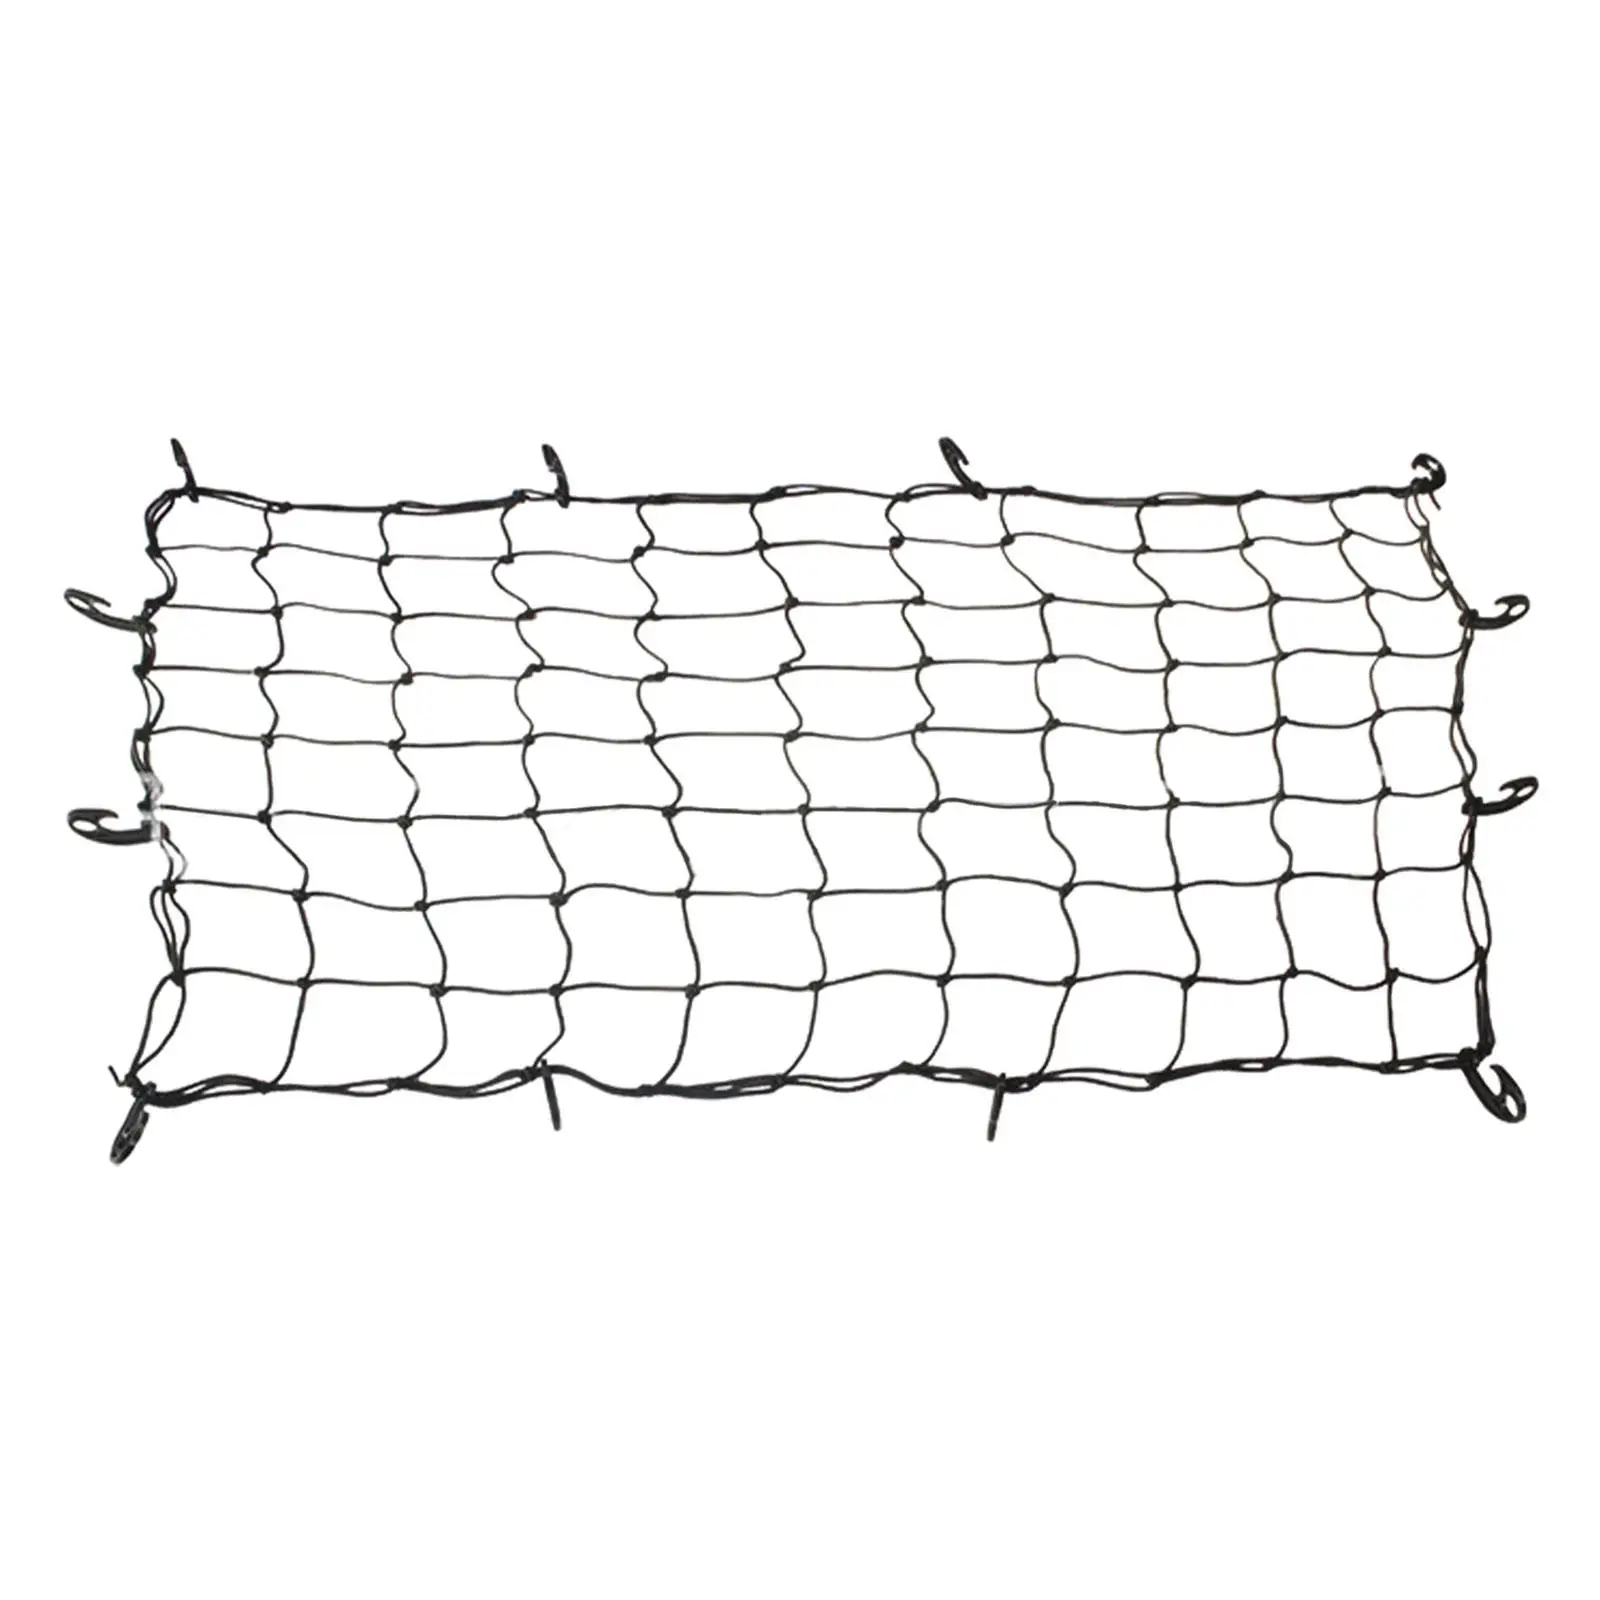 Truck Bed Nets Car Cargo Net Car Interior Accessories Heavy Duty Elastic Automotive Cargo Nets Roof Luggage Net for Trucks